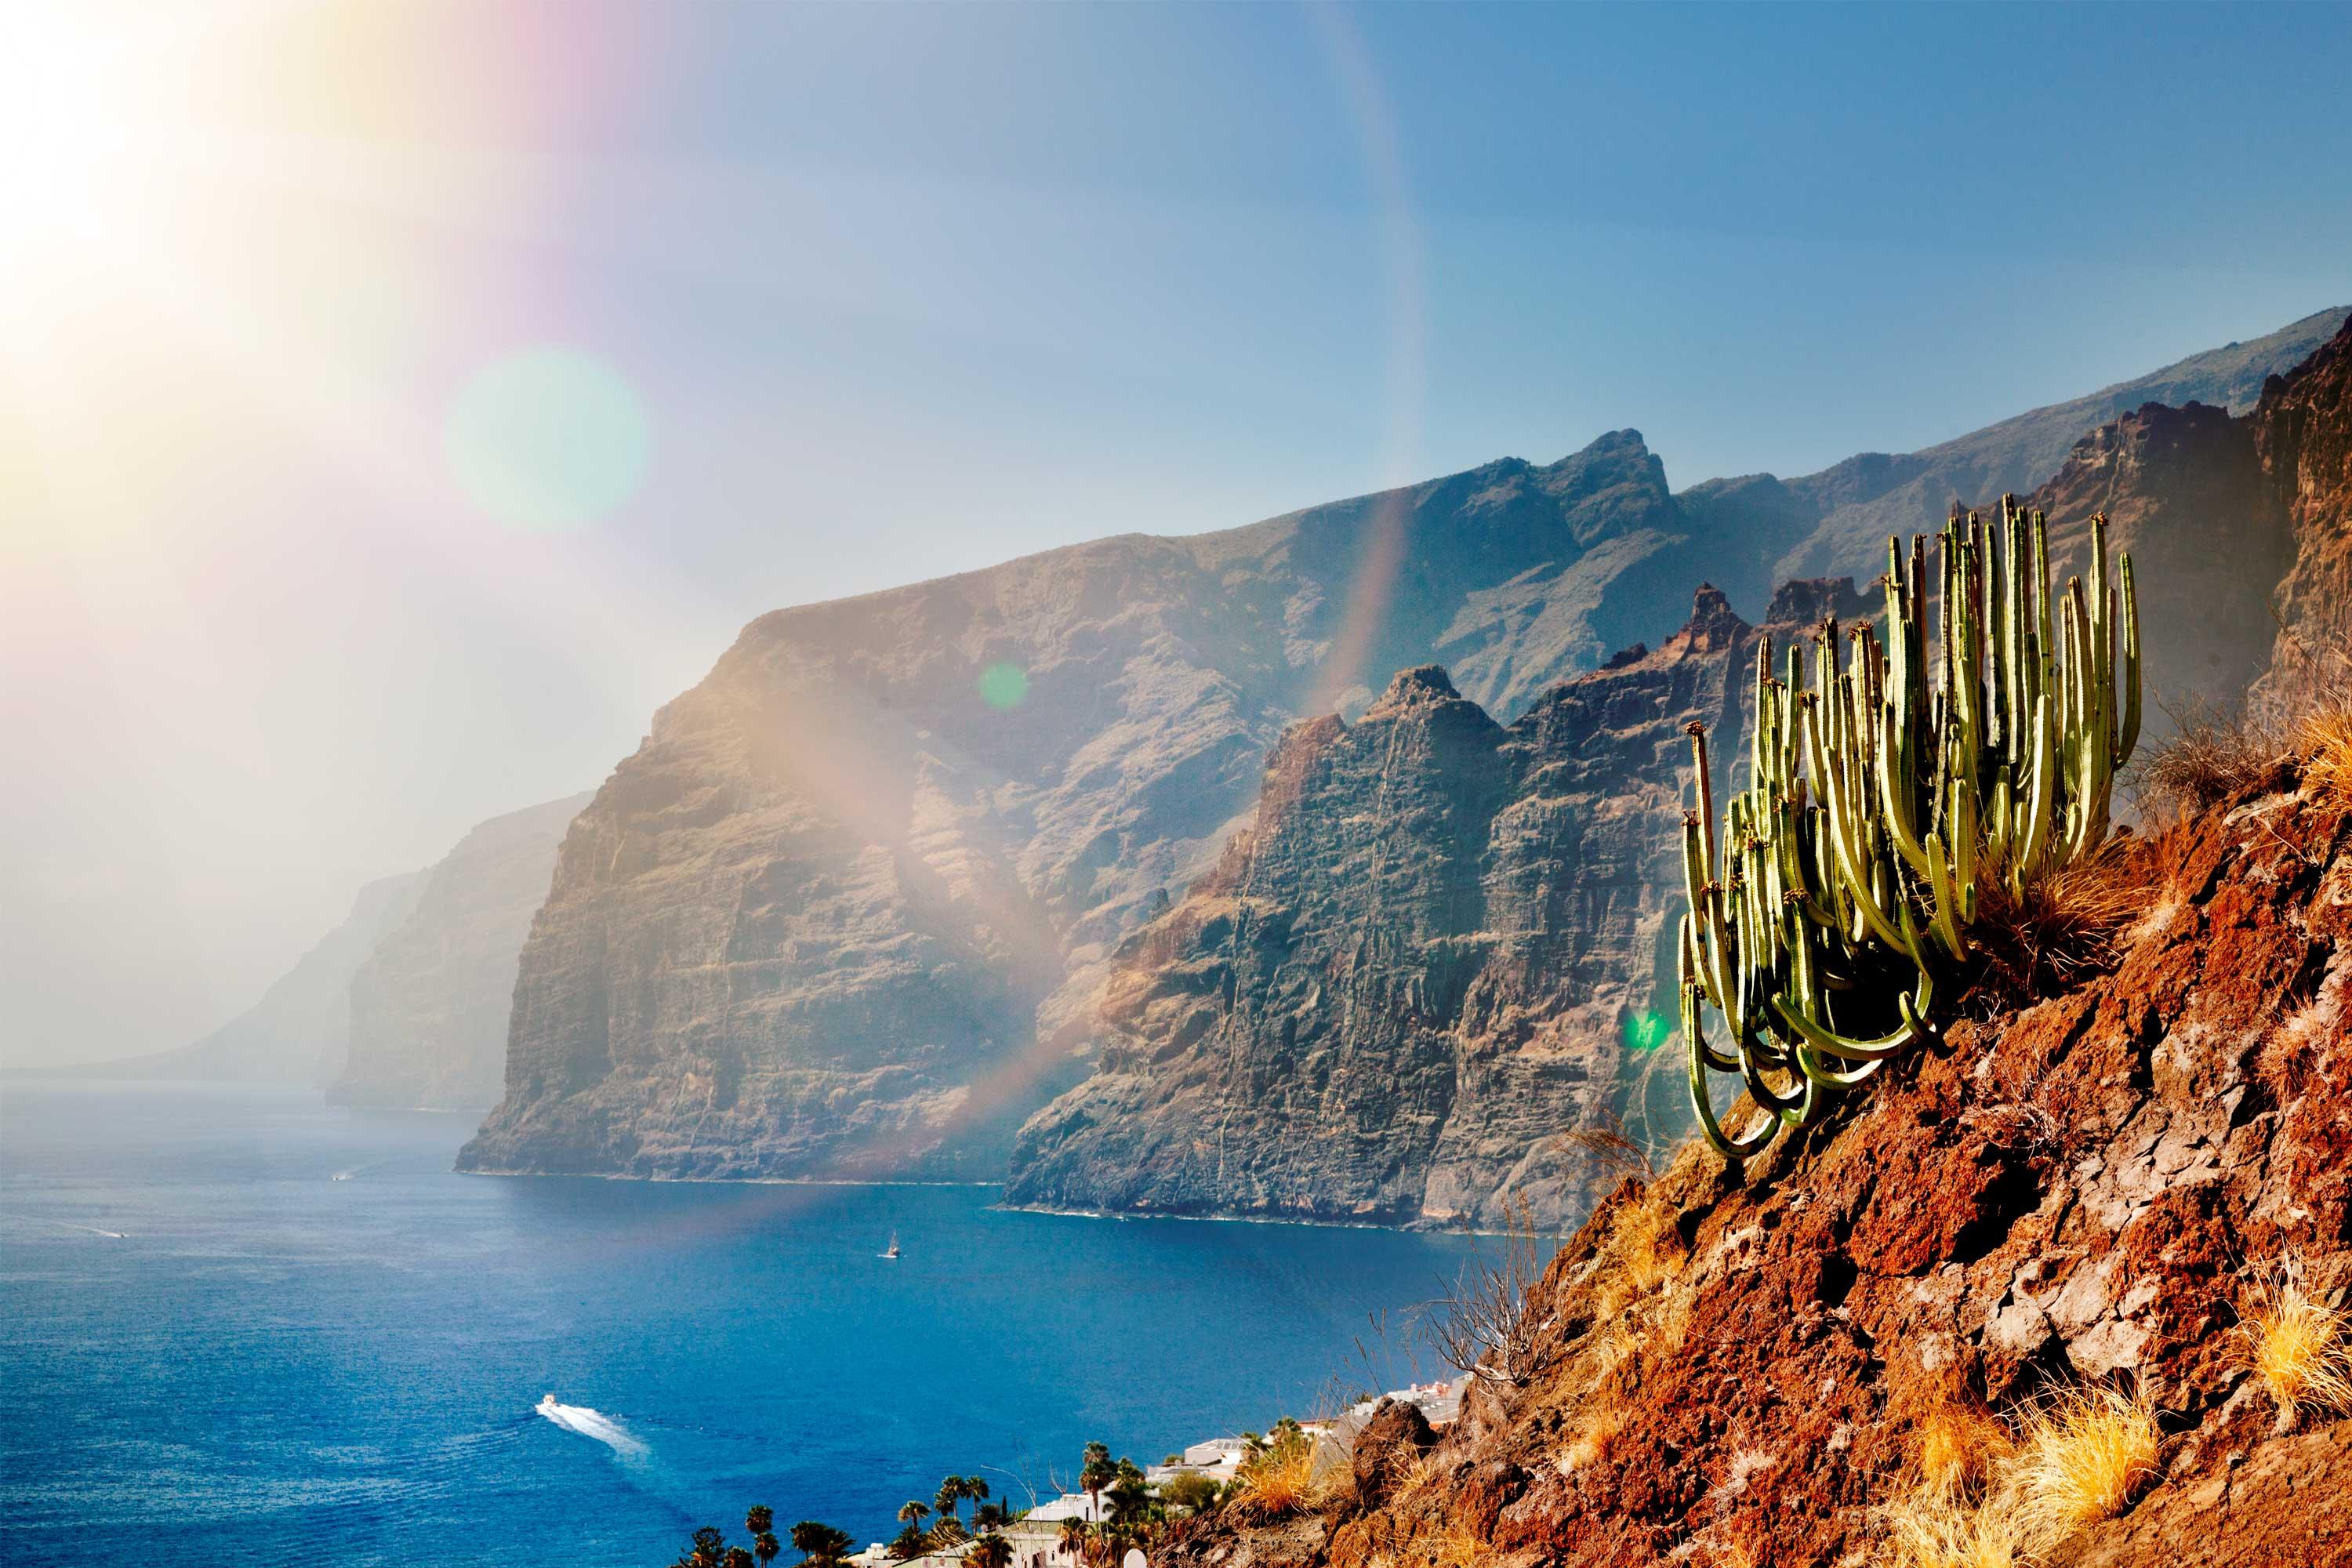 From the sea to the sky: the two faces of Los Gigantes